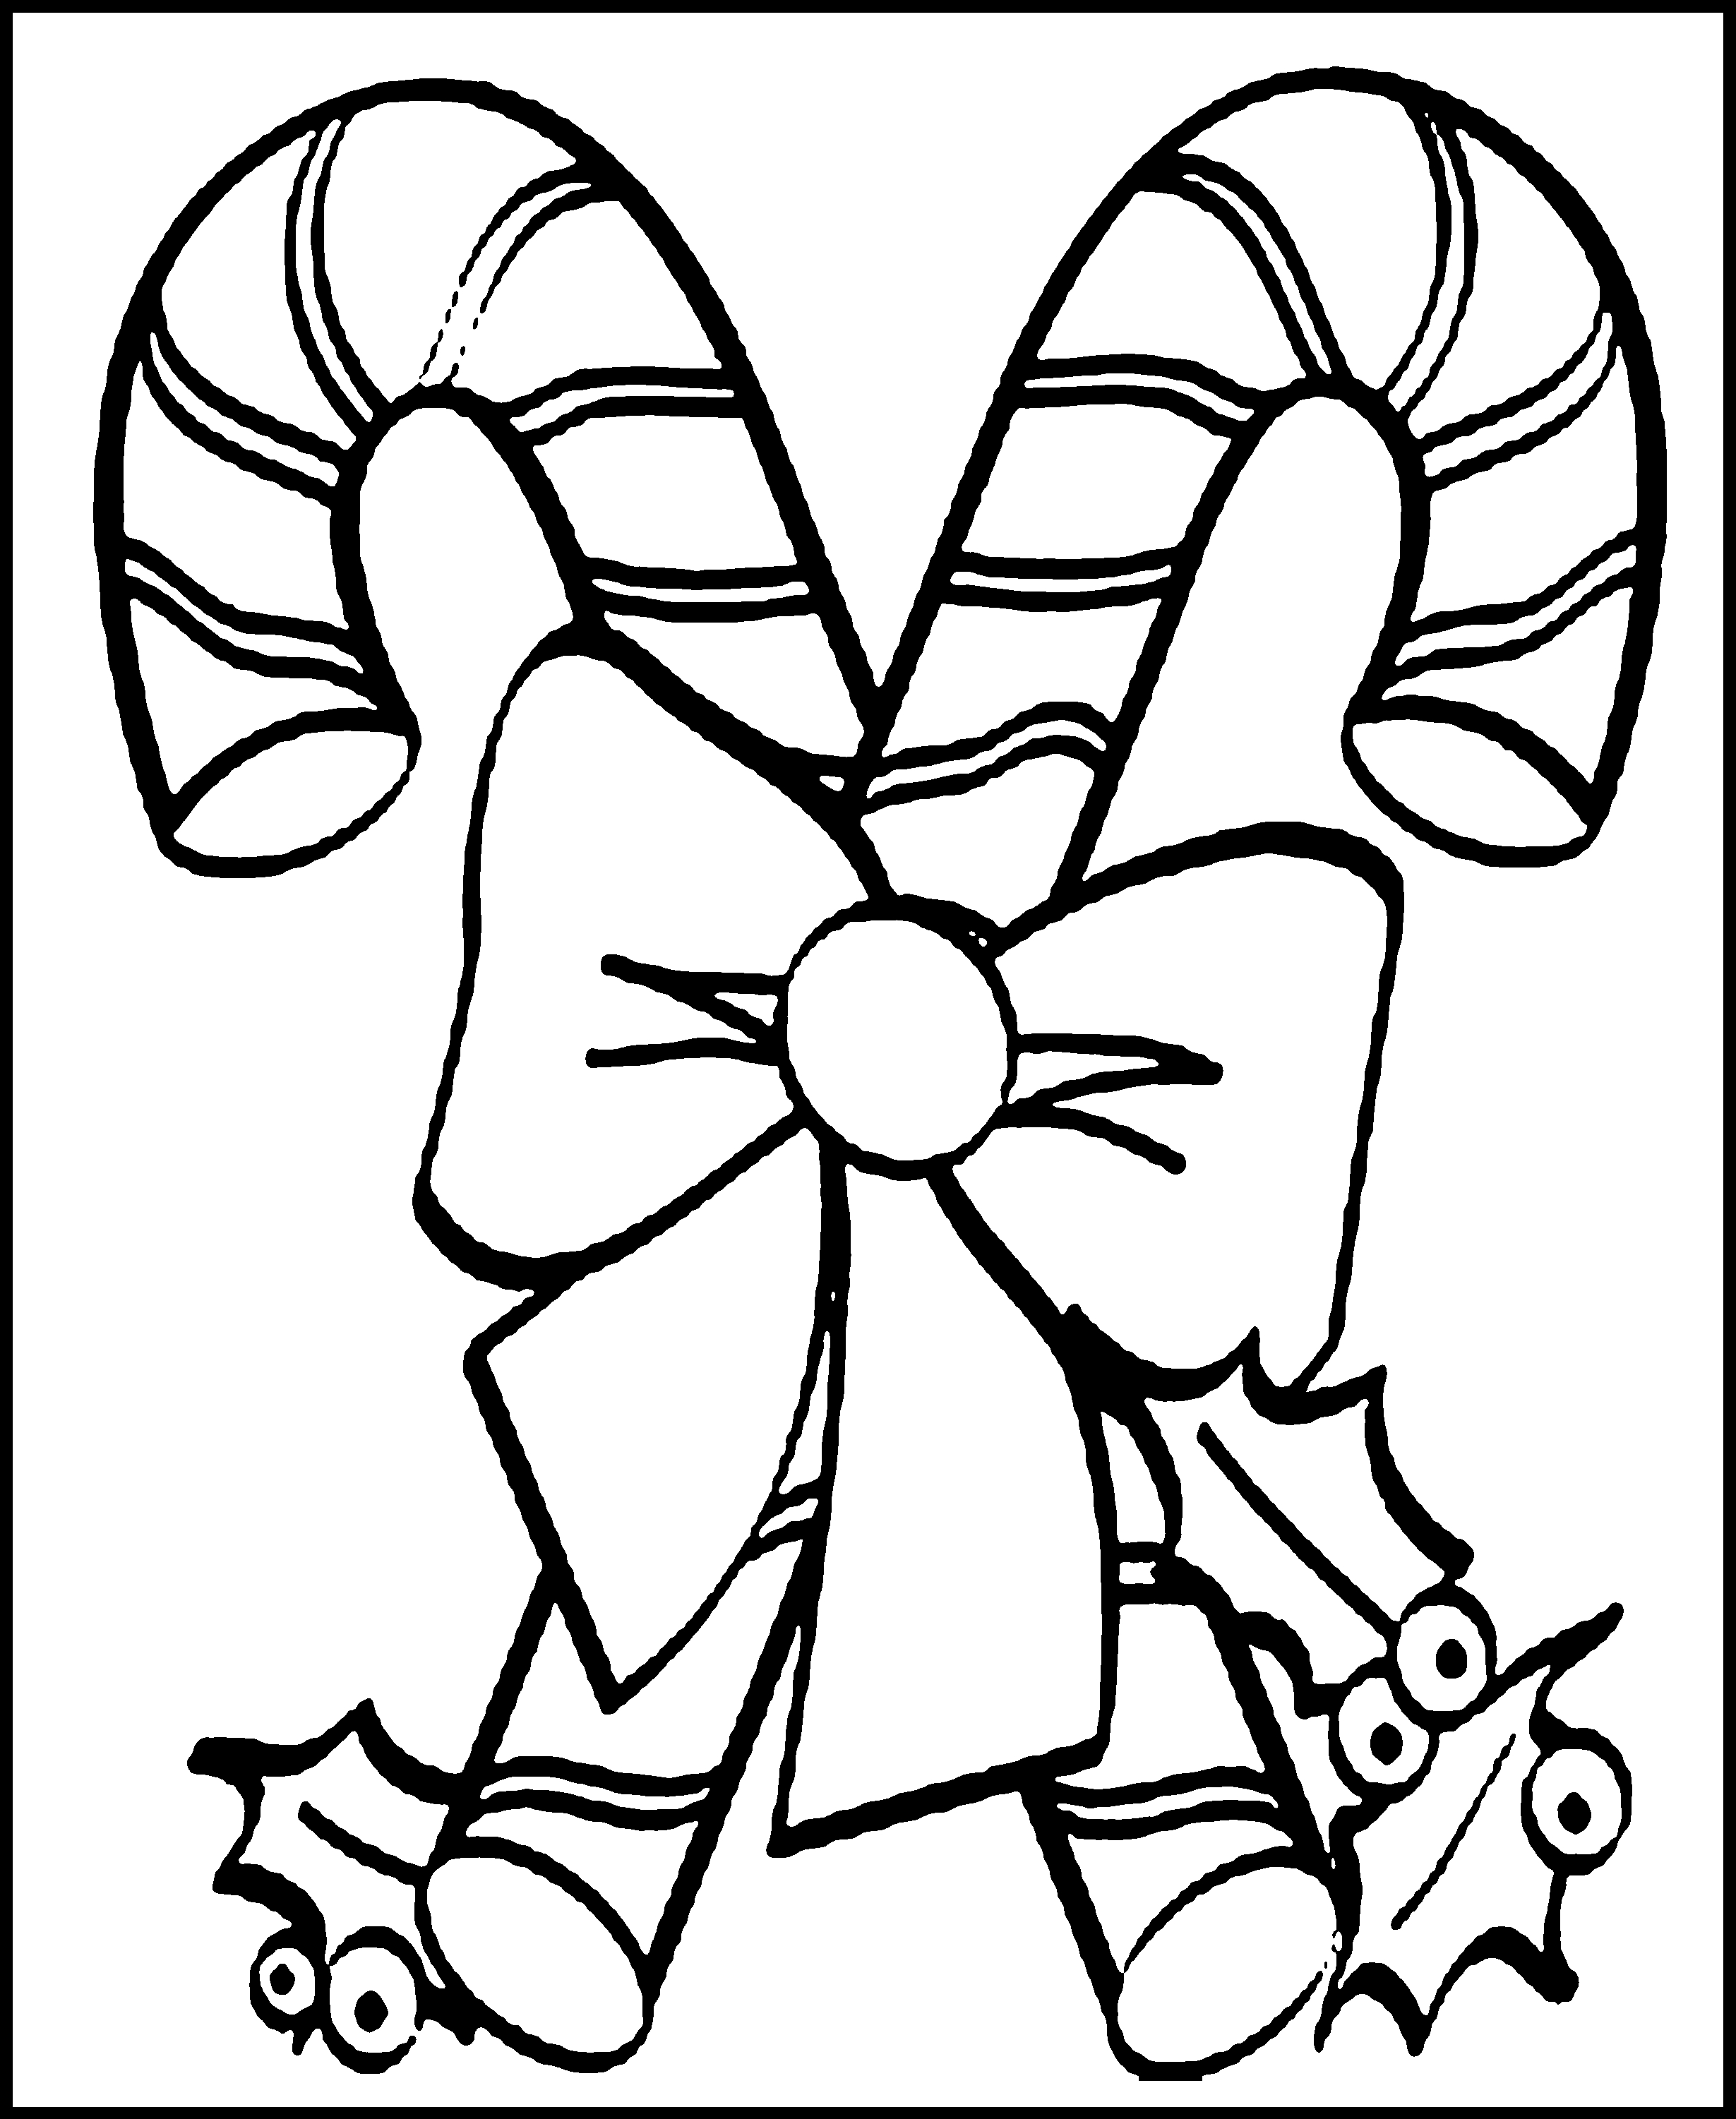 Free Printable Candy Cane Coloring Pages For Kids | Young At Heart - Free Candy Cane Template Printable